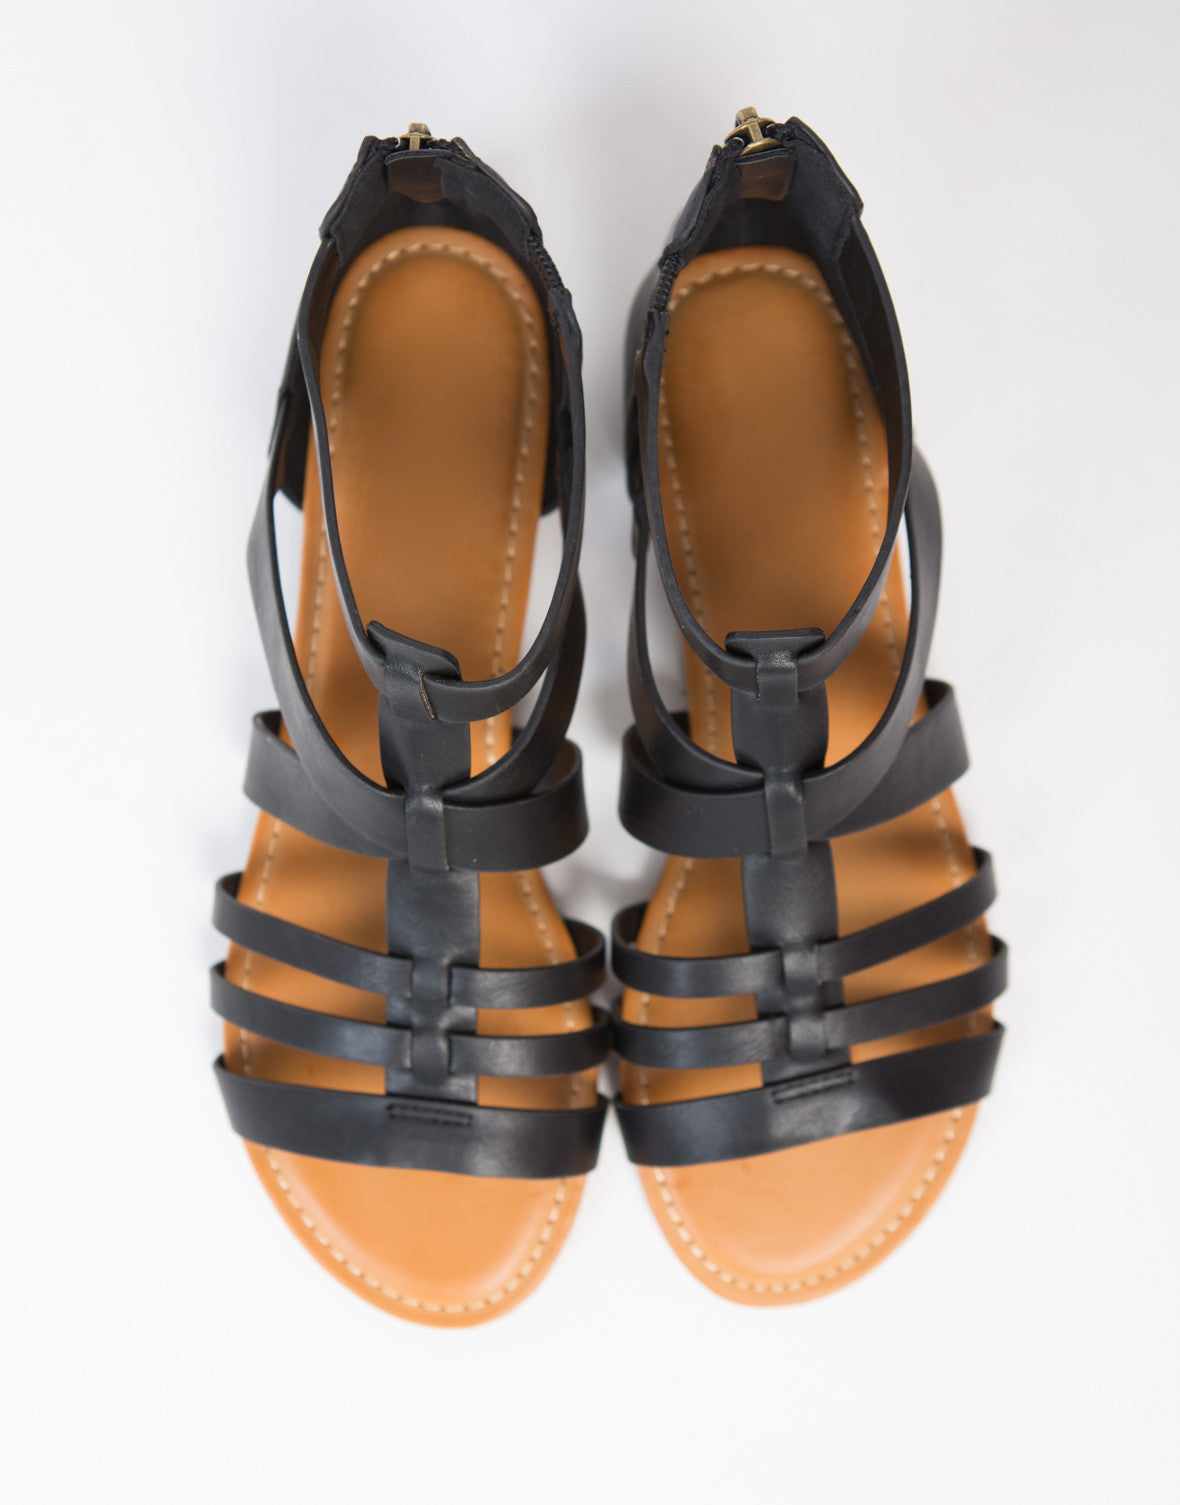  Strappy Leather Sandals  Cut Out Sandals  Black Ankle 